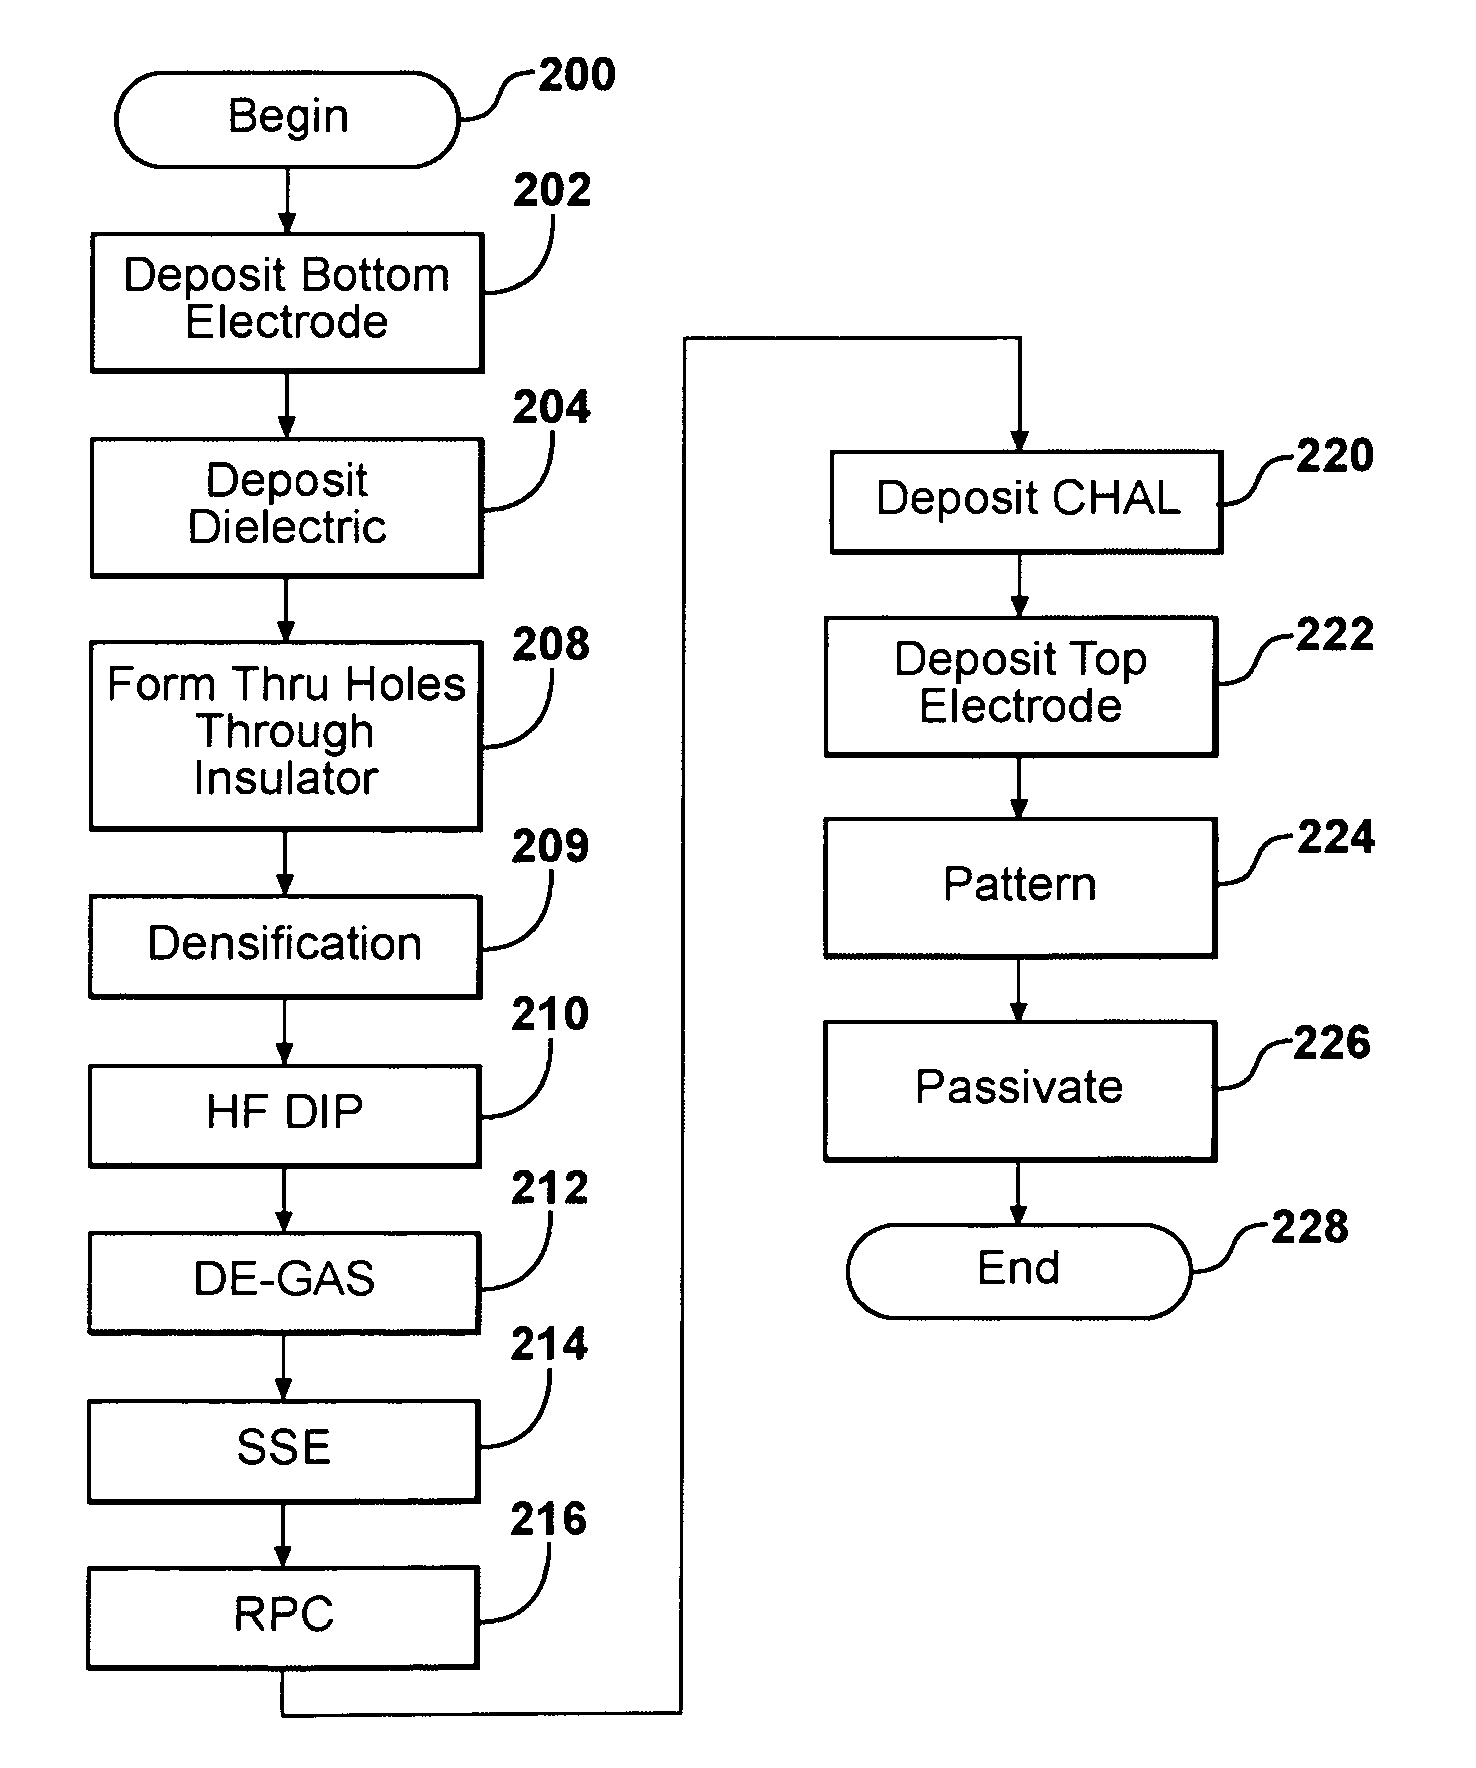 Method for manufacturing Chalcogenide devices